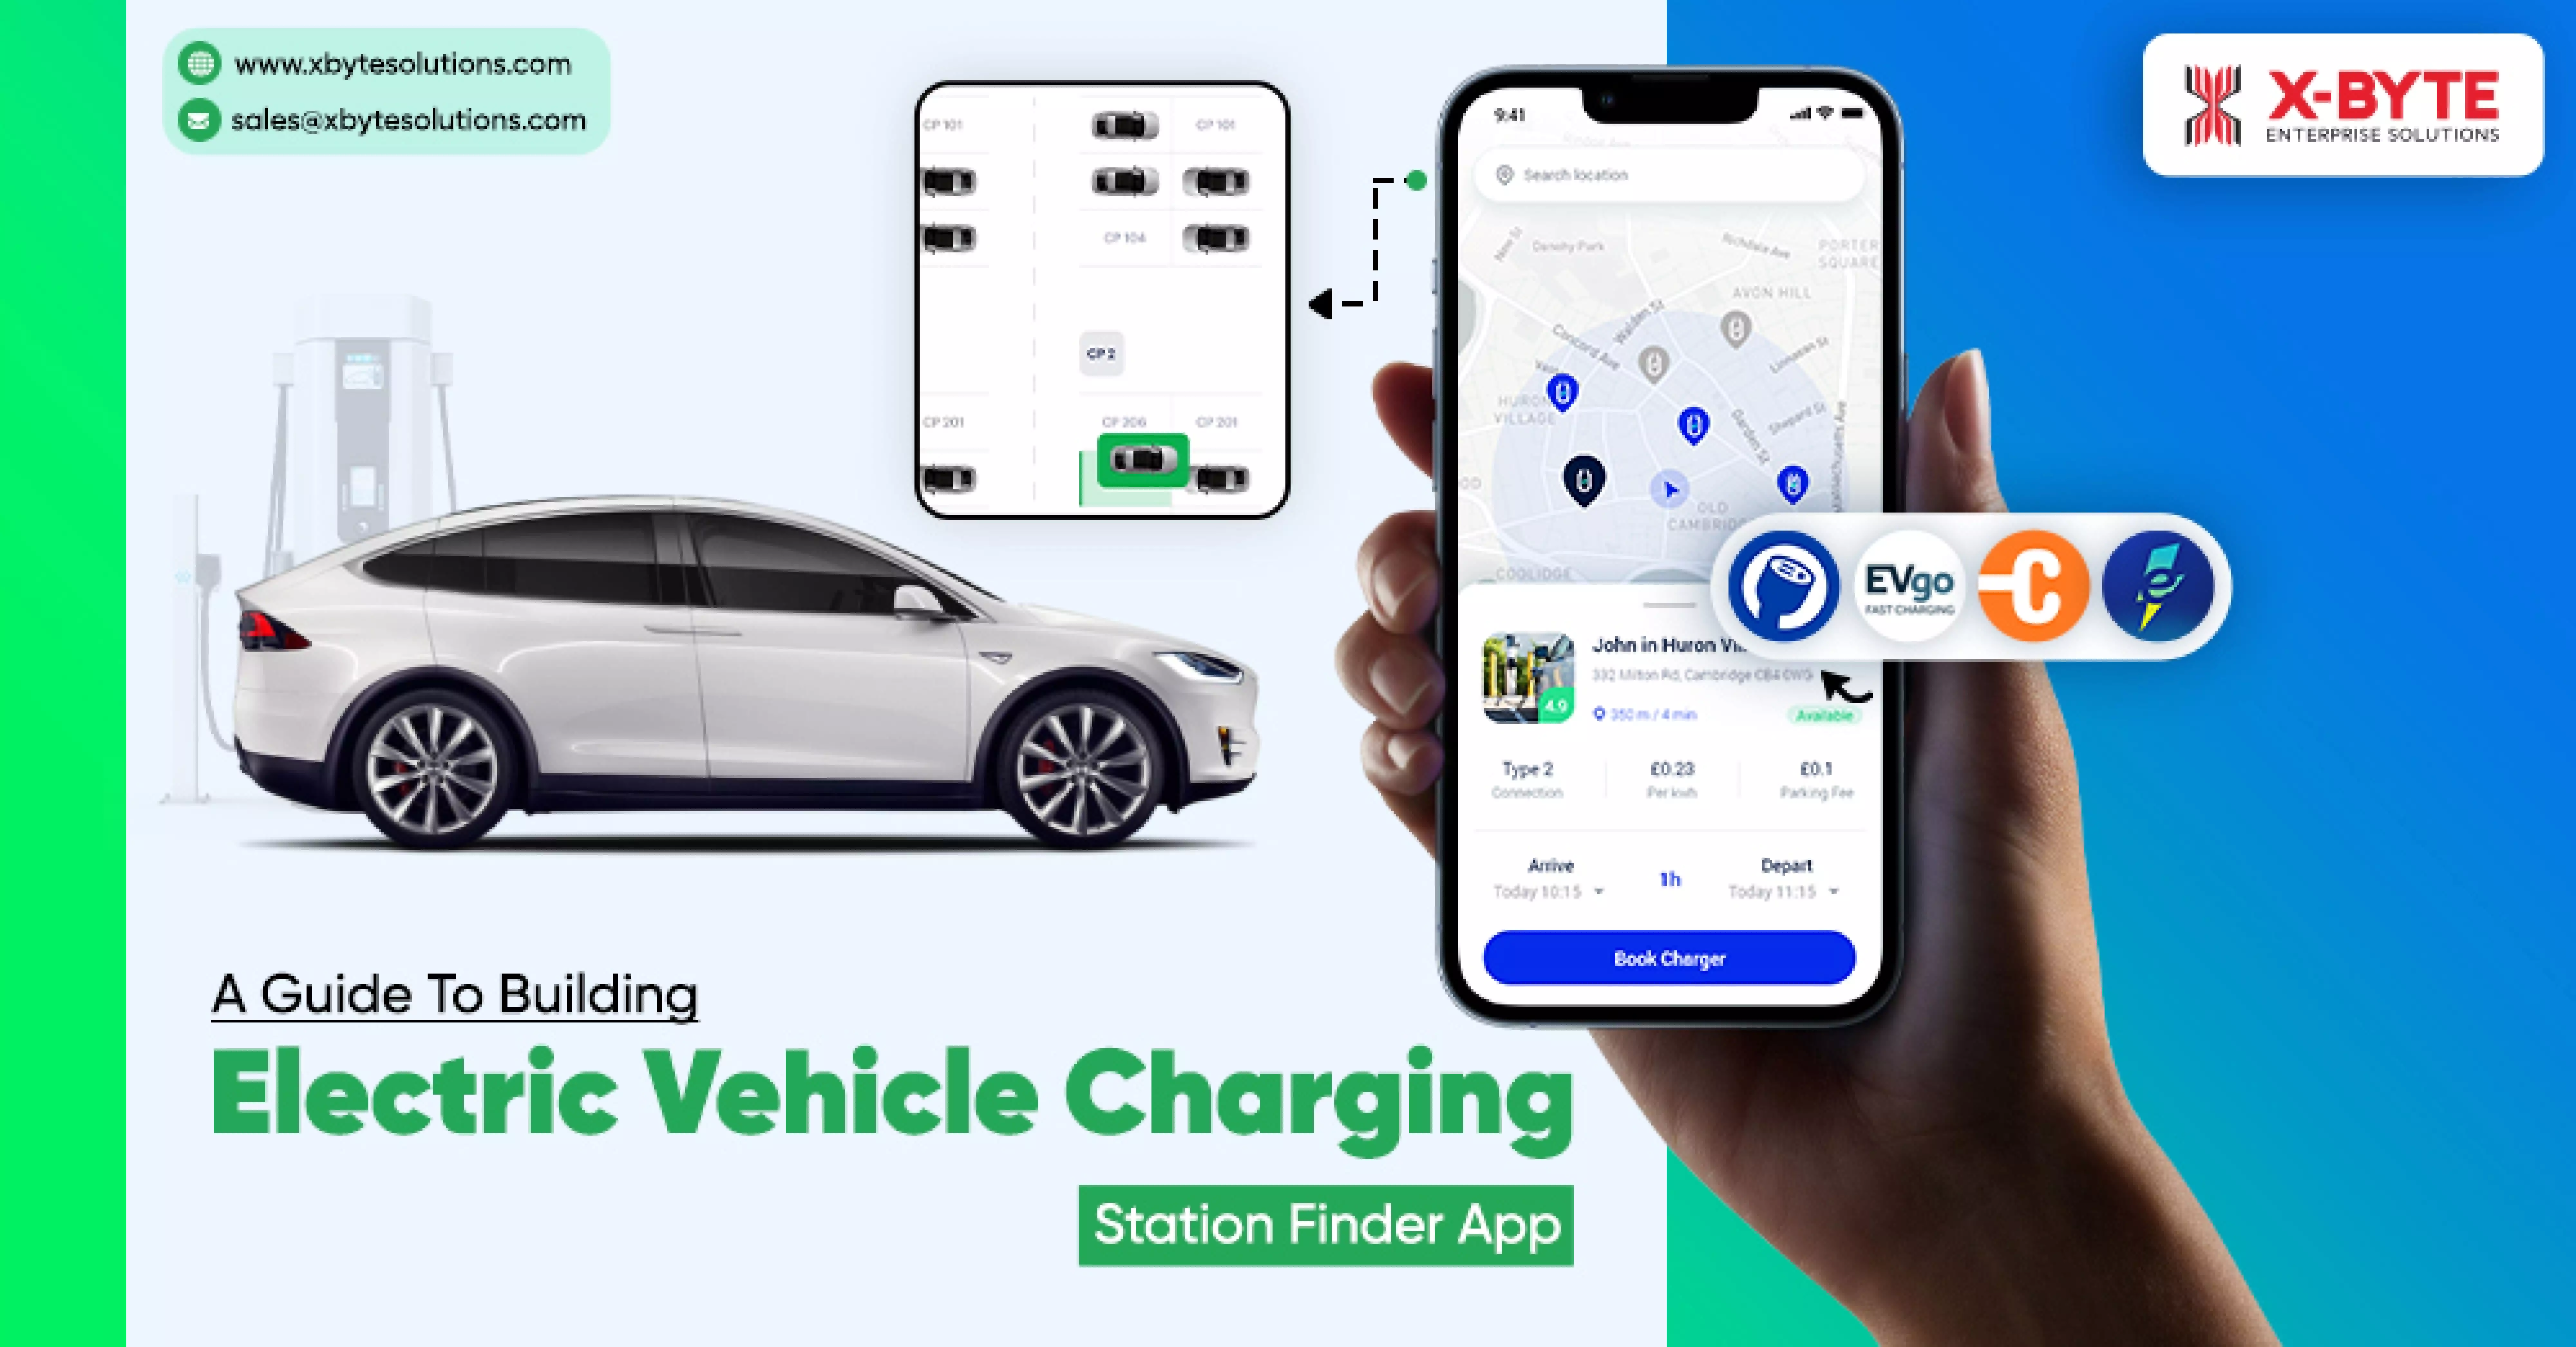 A Guide To Building Electric Vehicle Charging Station Finder App